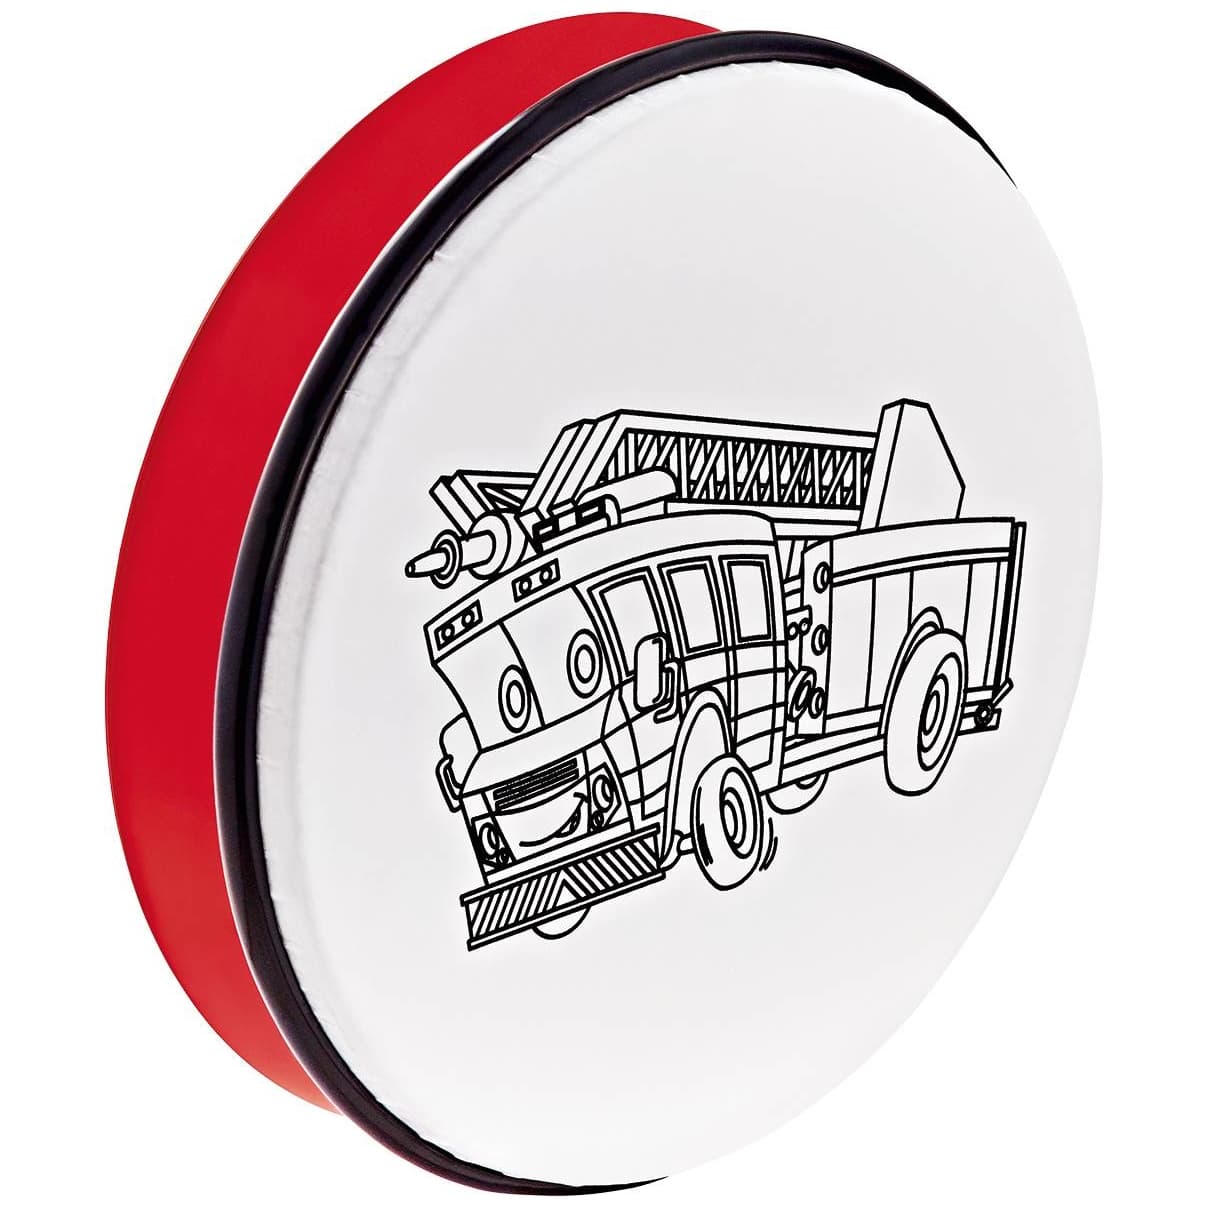 Nino Percussion 10" Customizable ABS Hand Drum, Fire Truck Graphic